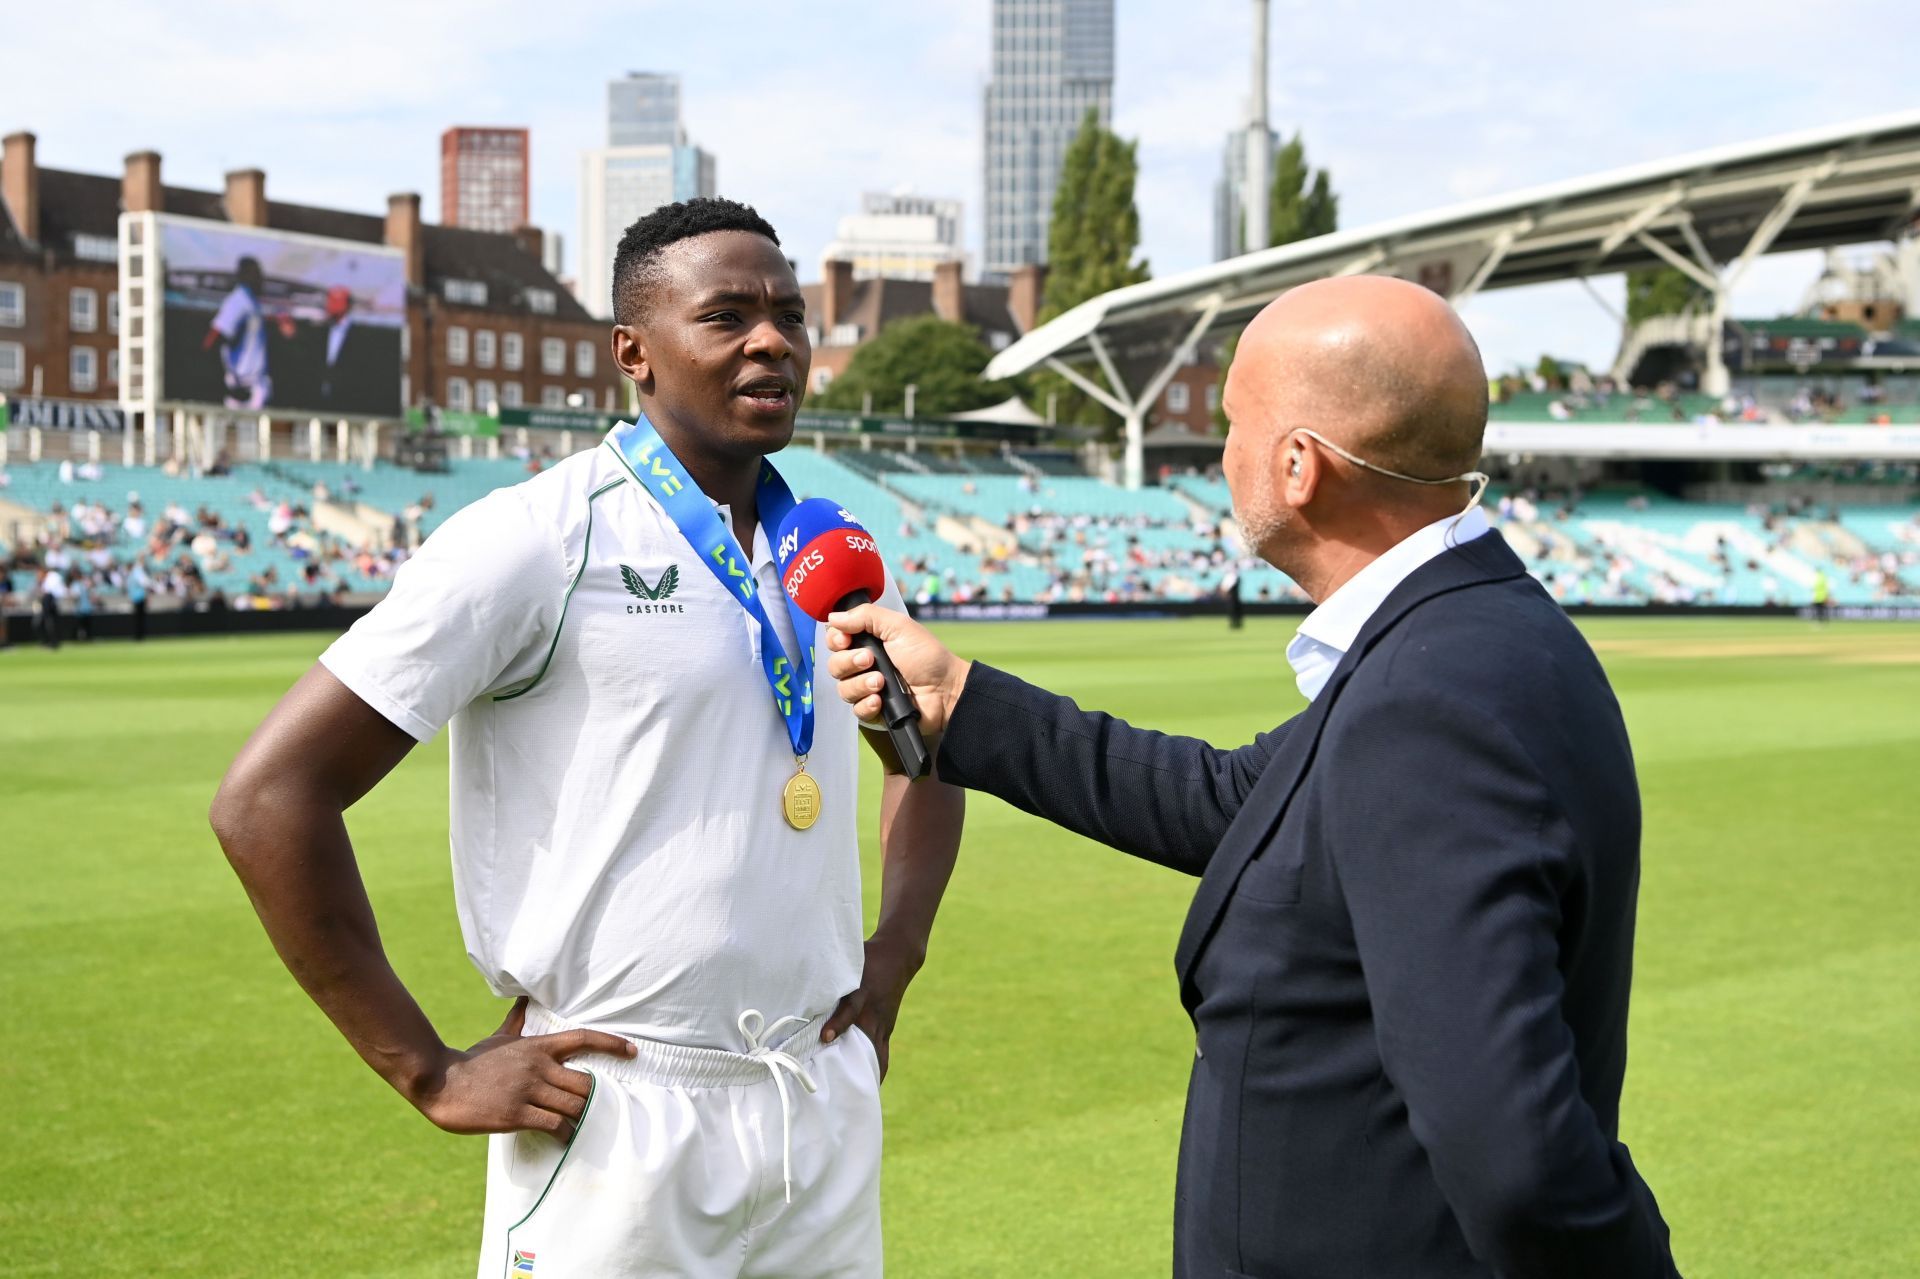 England v South Africa - Third LV= Insurance Test Match: Day Five (Image: Getty)